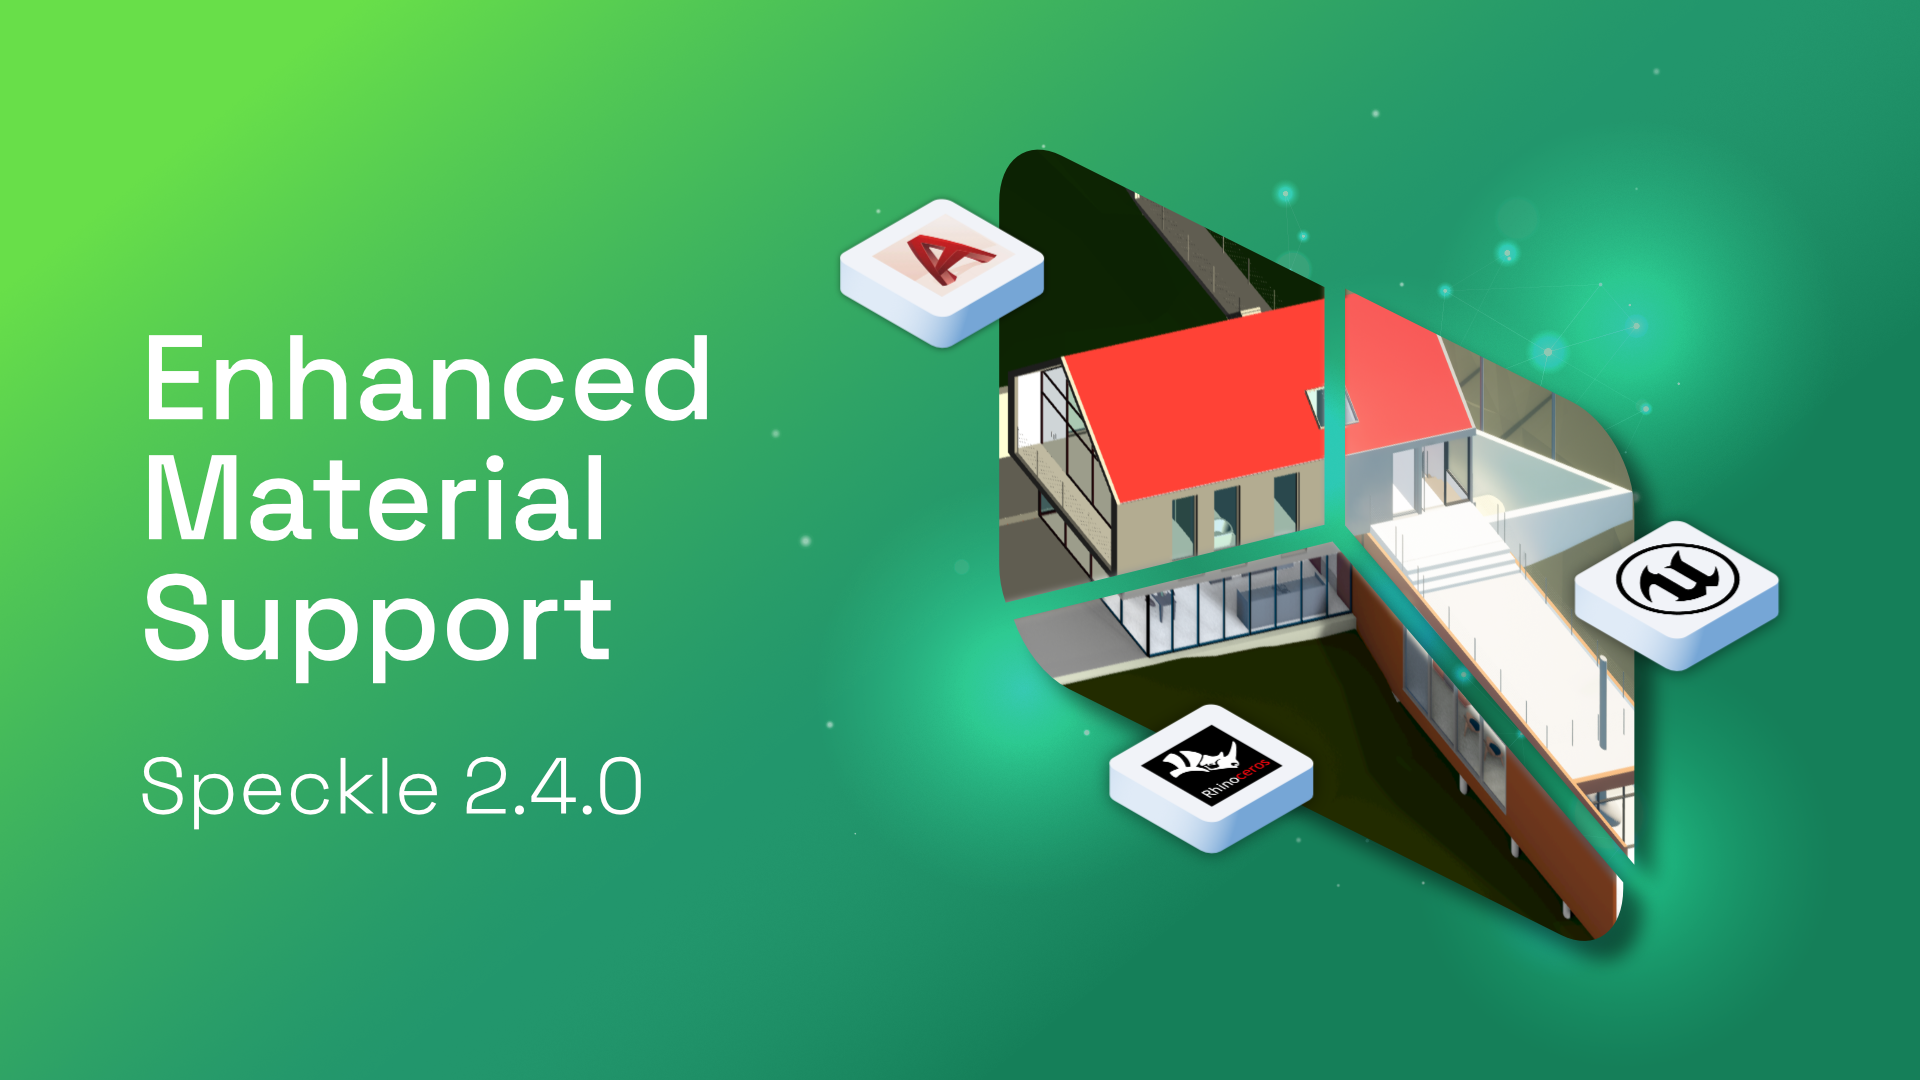 Speckle 2.4.0 Changes - Enhanced Material Support